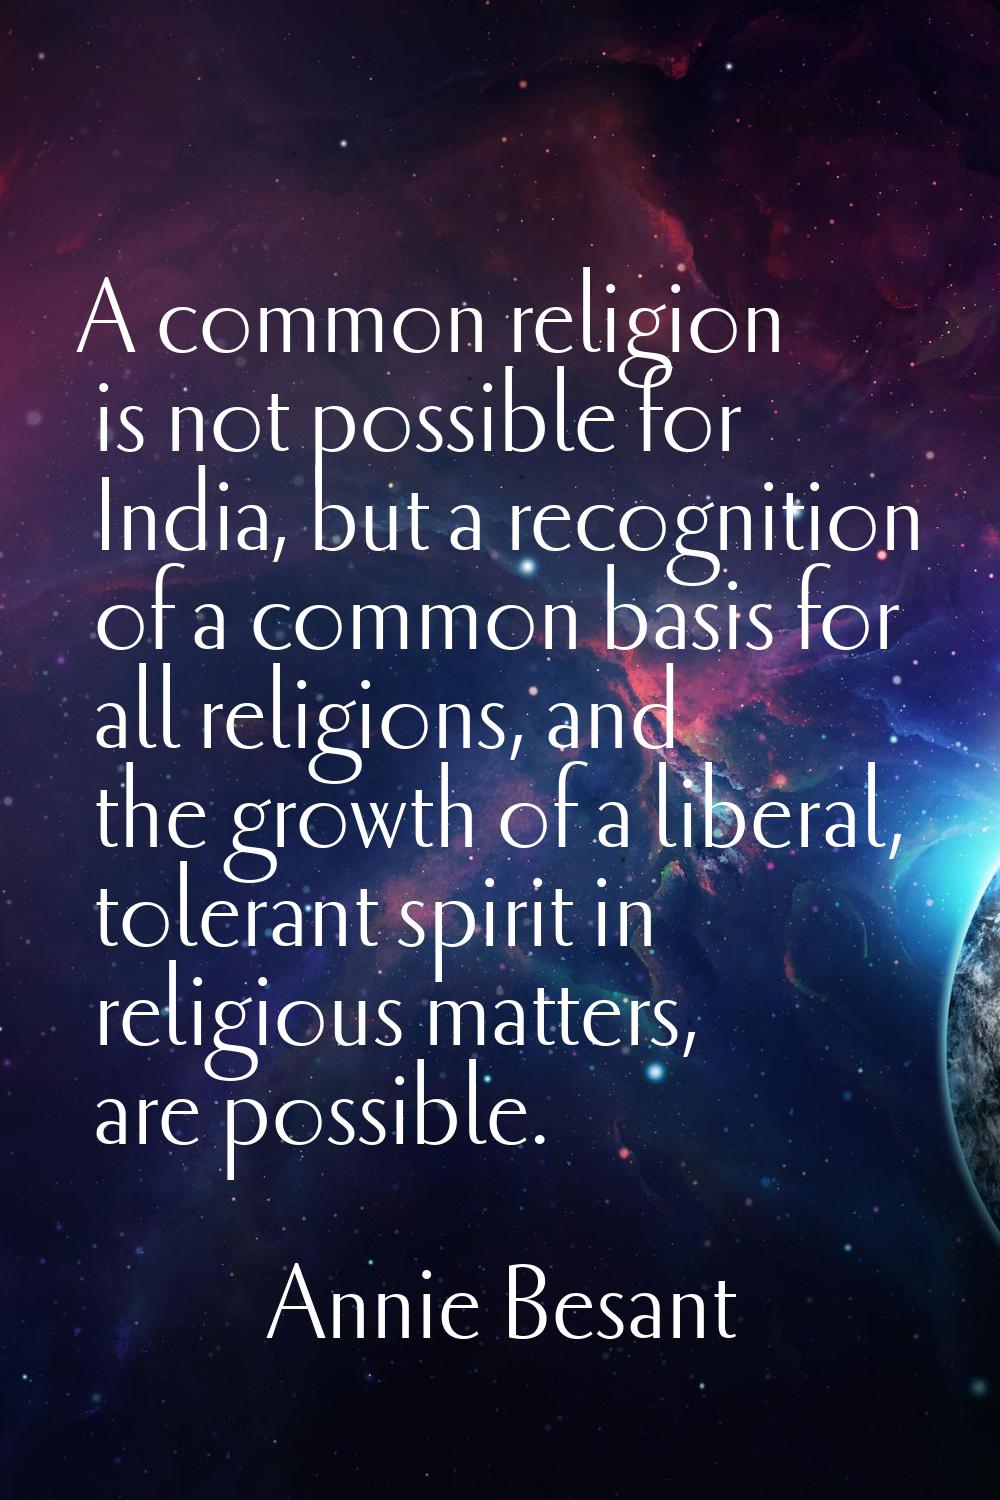 A common religion is not possible for India, but a recognition of a common basis for all religions,